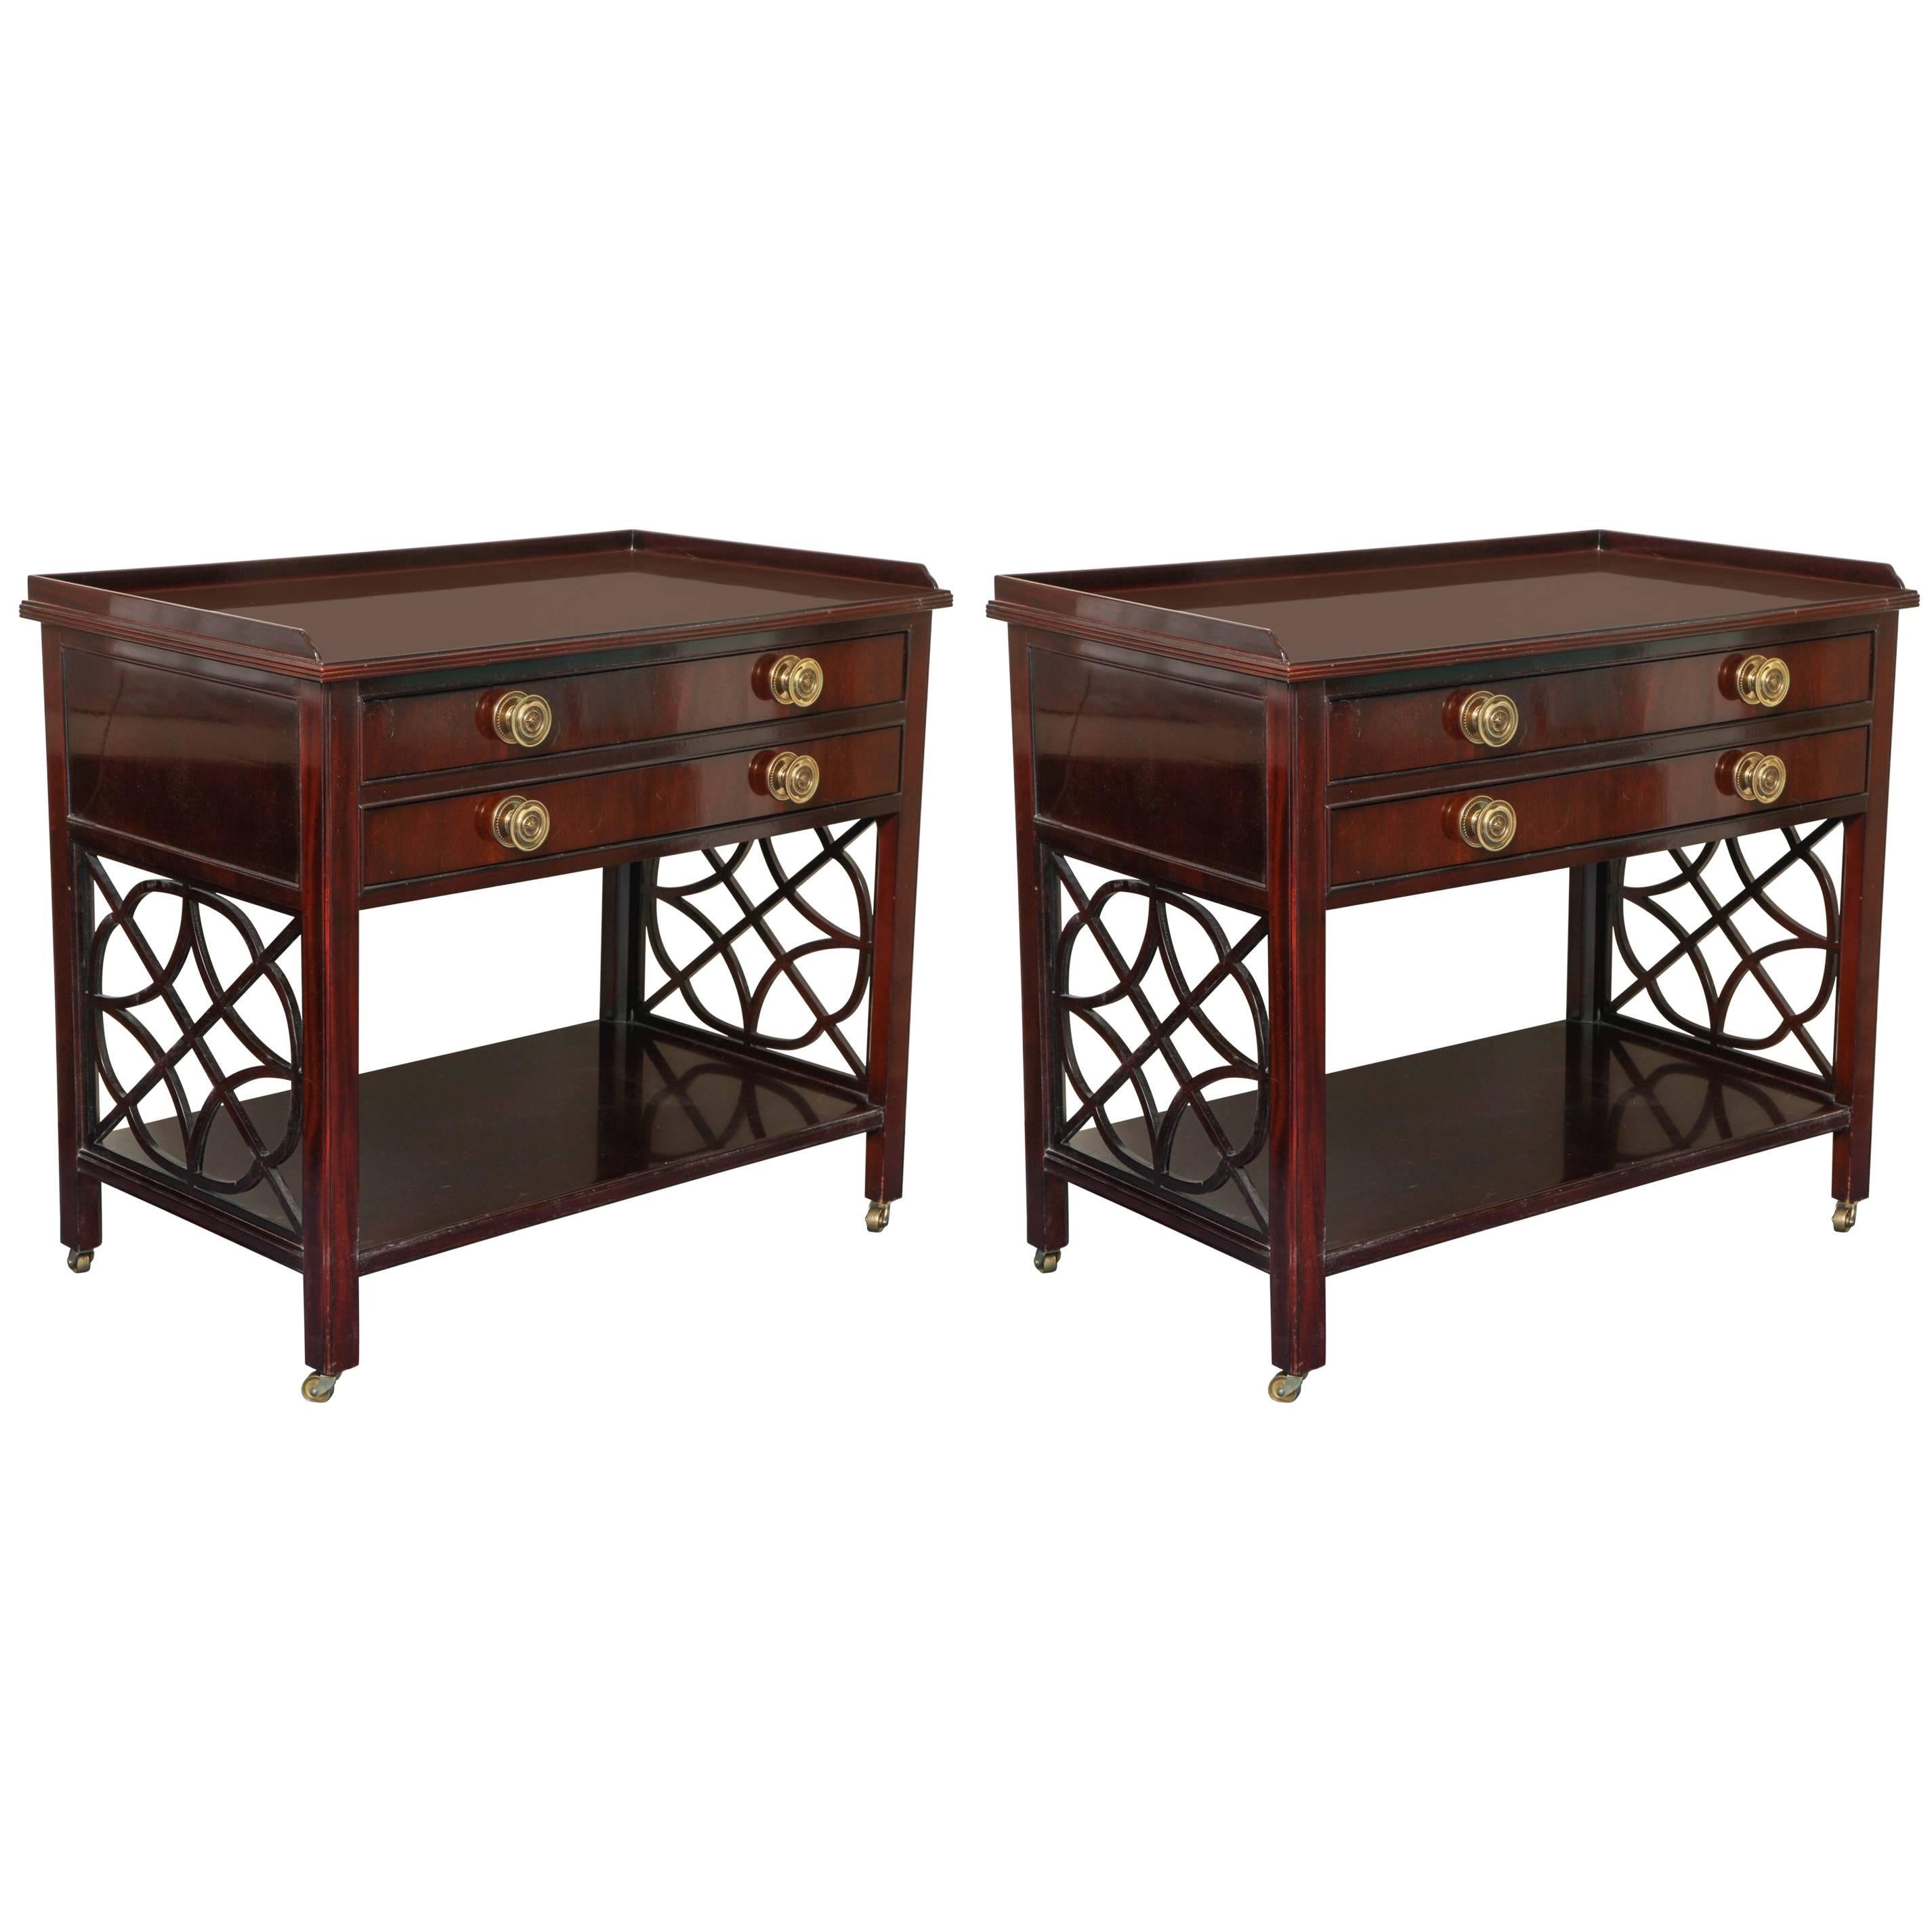 Pair of Chinese Chippendale Mahogany Nightstands by Baker